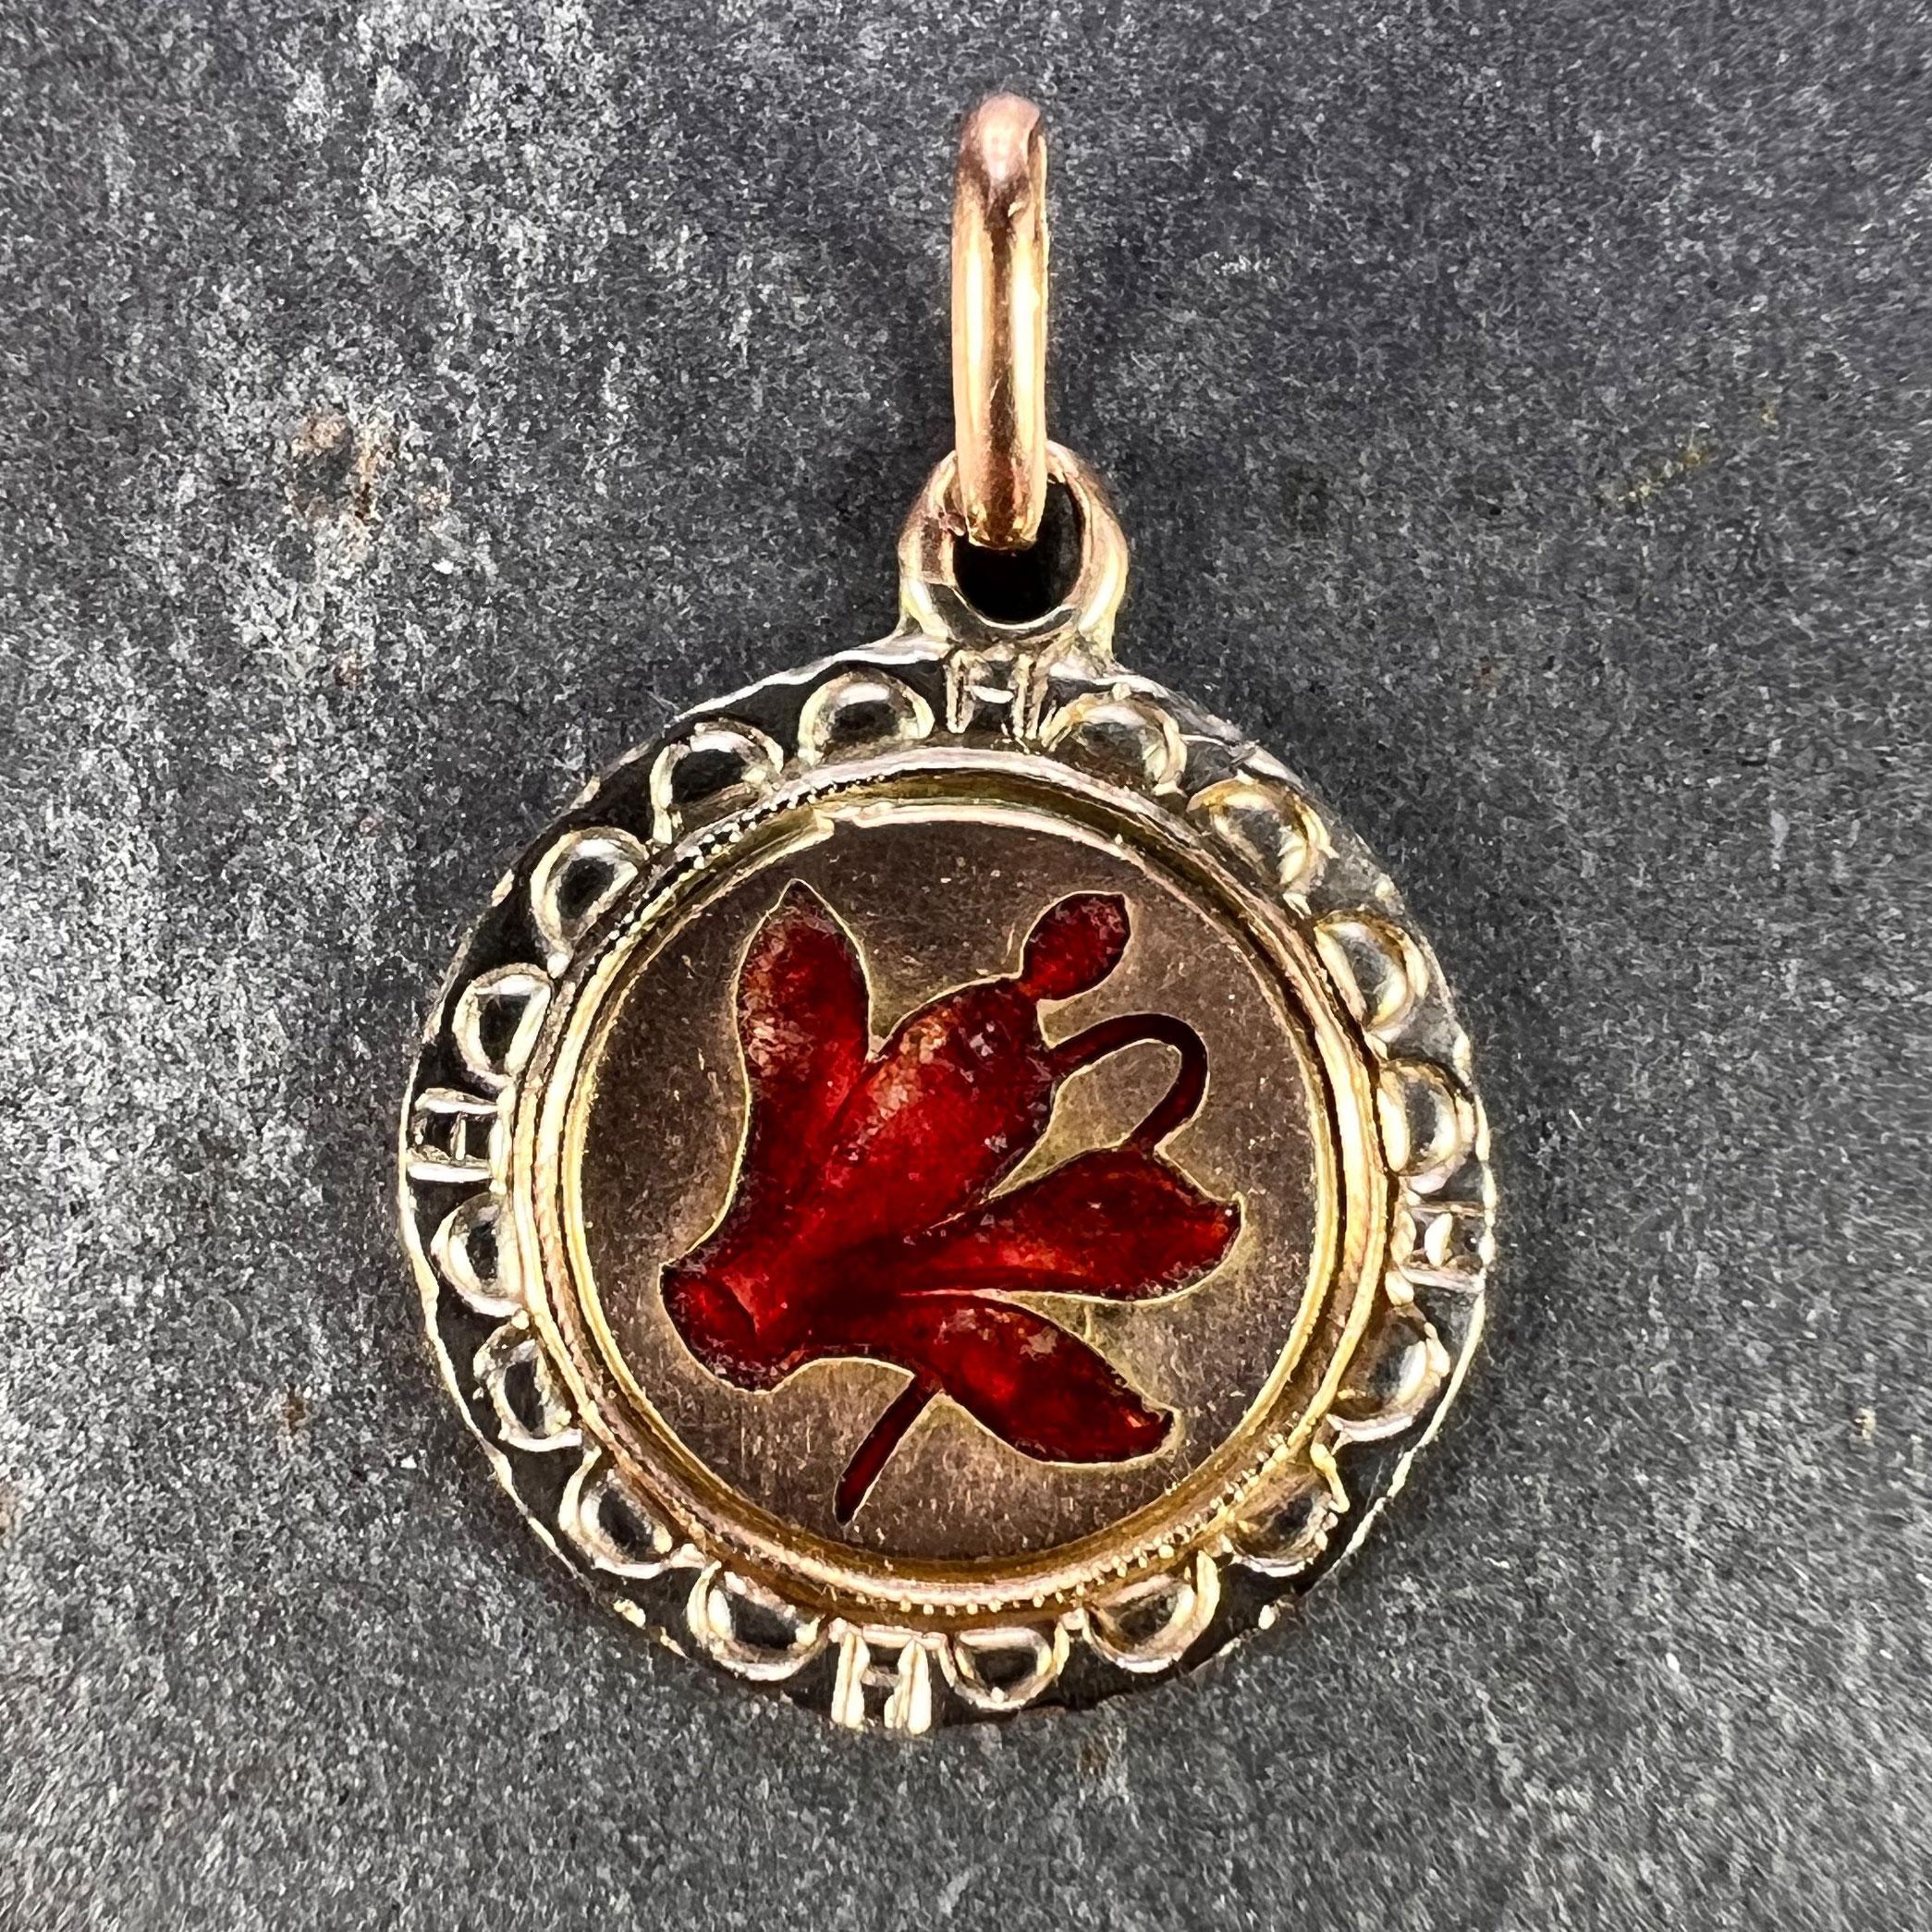 A 12 karat (12K) yellow gold charm pendant designed as a disc depicting a red enamel cyclamen surrounded by an intricate engraved white gold border. The cyclamen flower represents love and tenderness. Stamped with a French import mark to the pendant